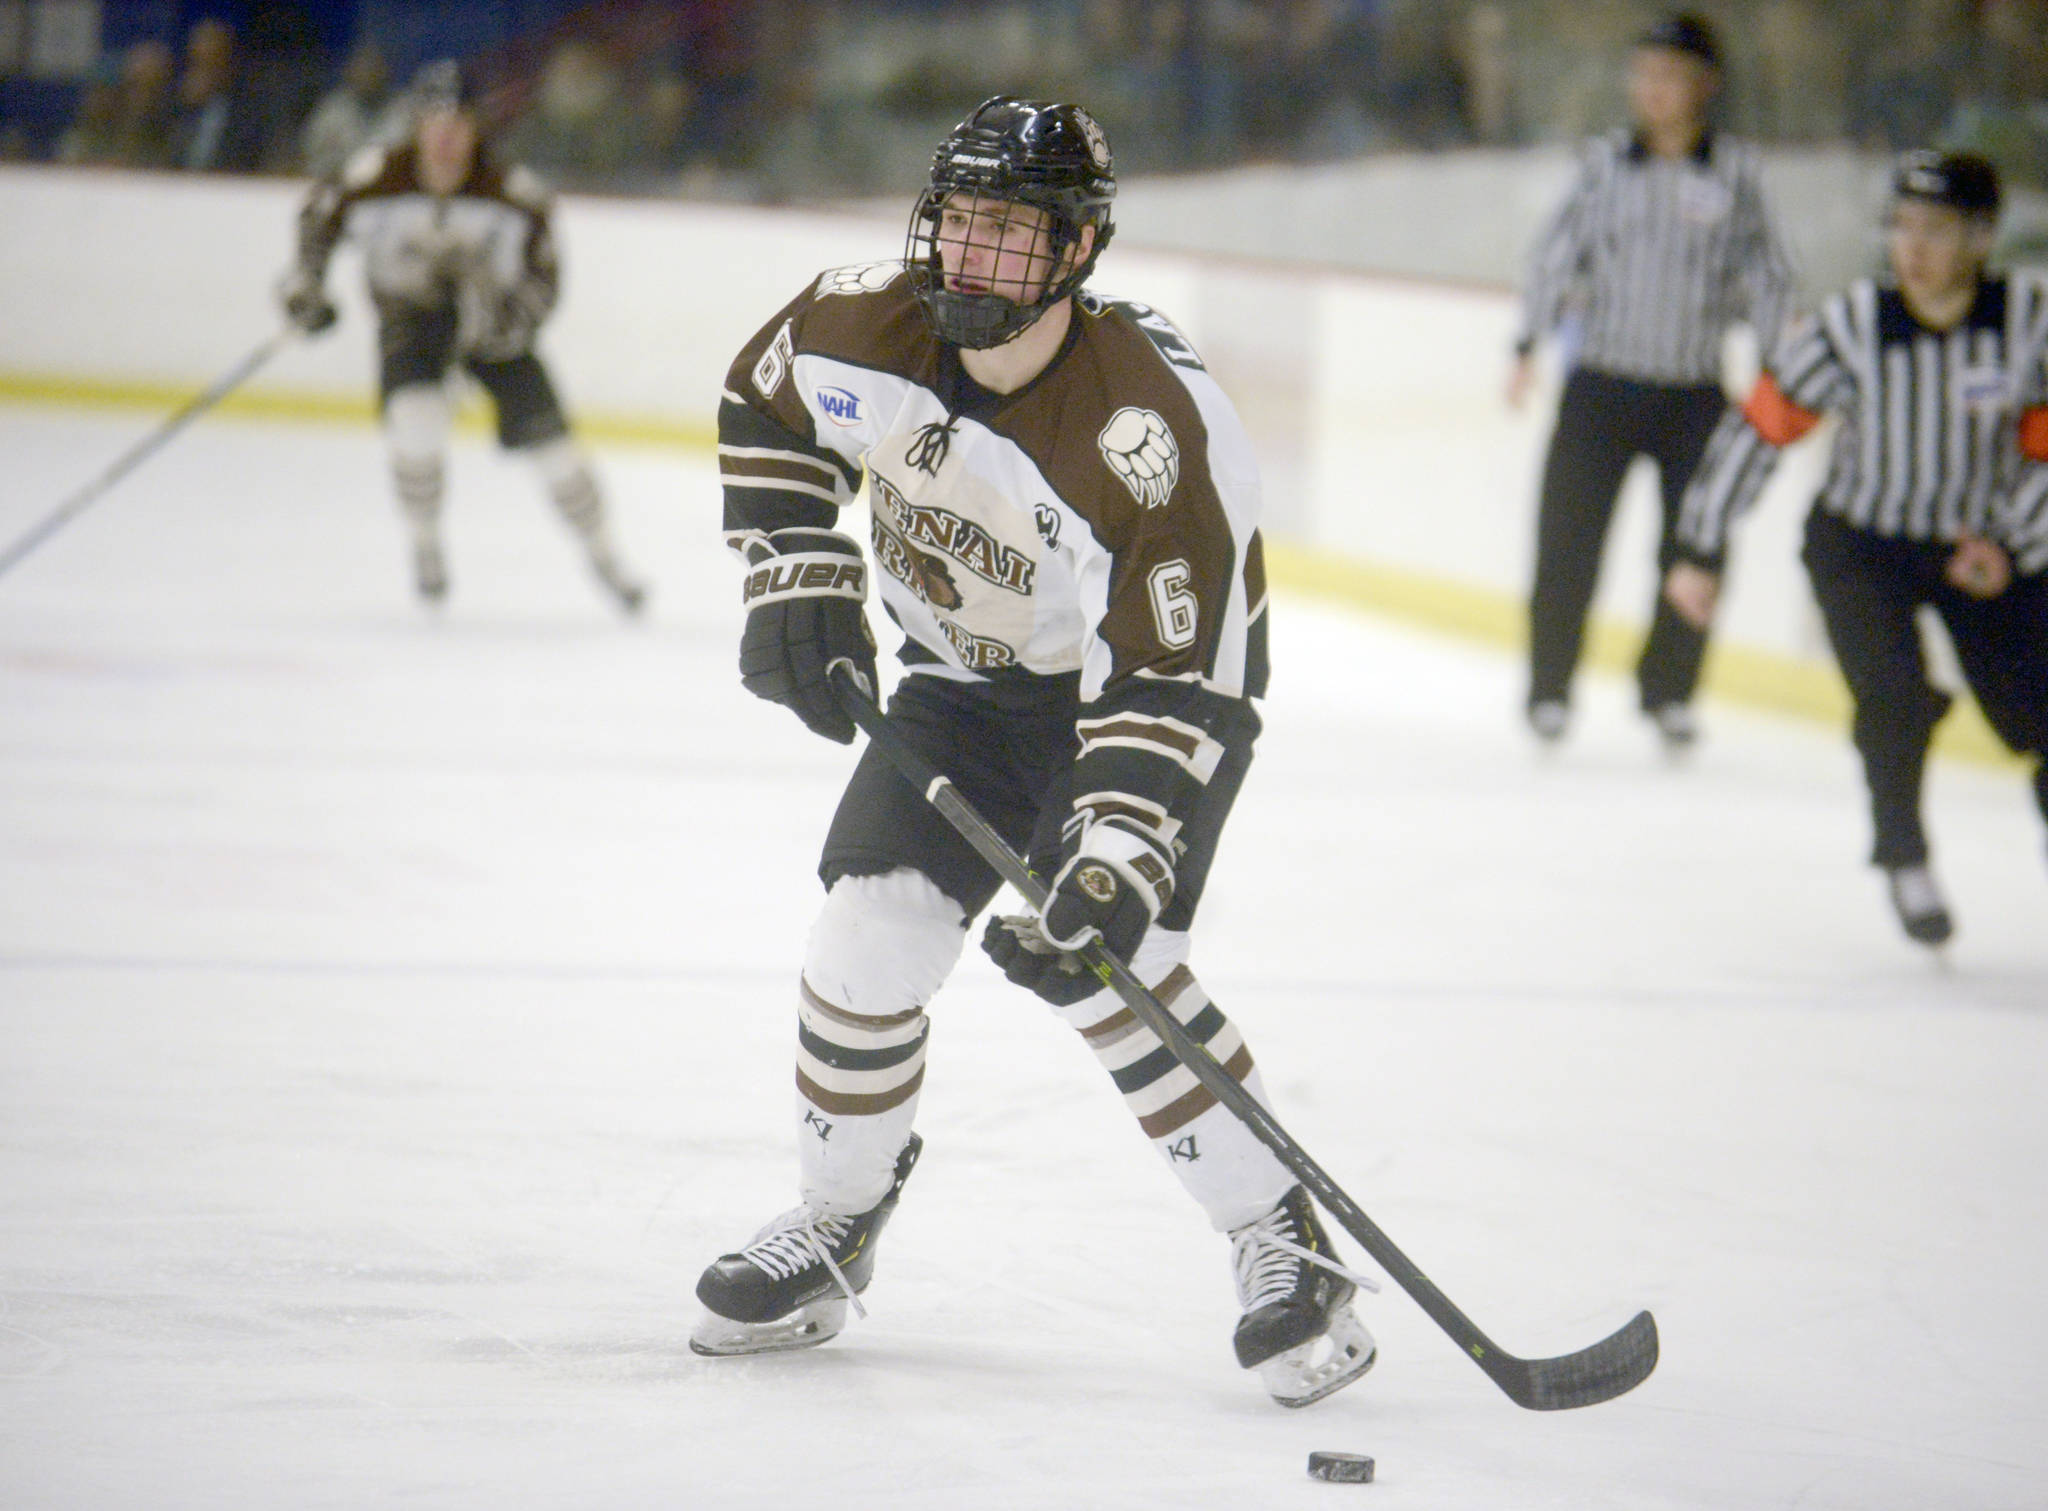 Eagle River’s Lajoie comes of age quickly for Brown Bears